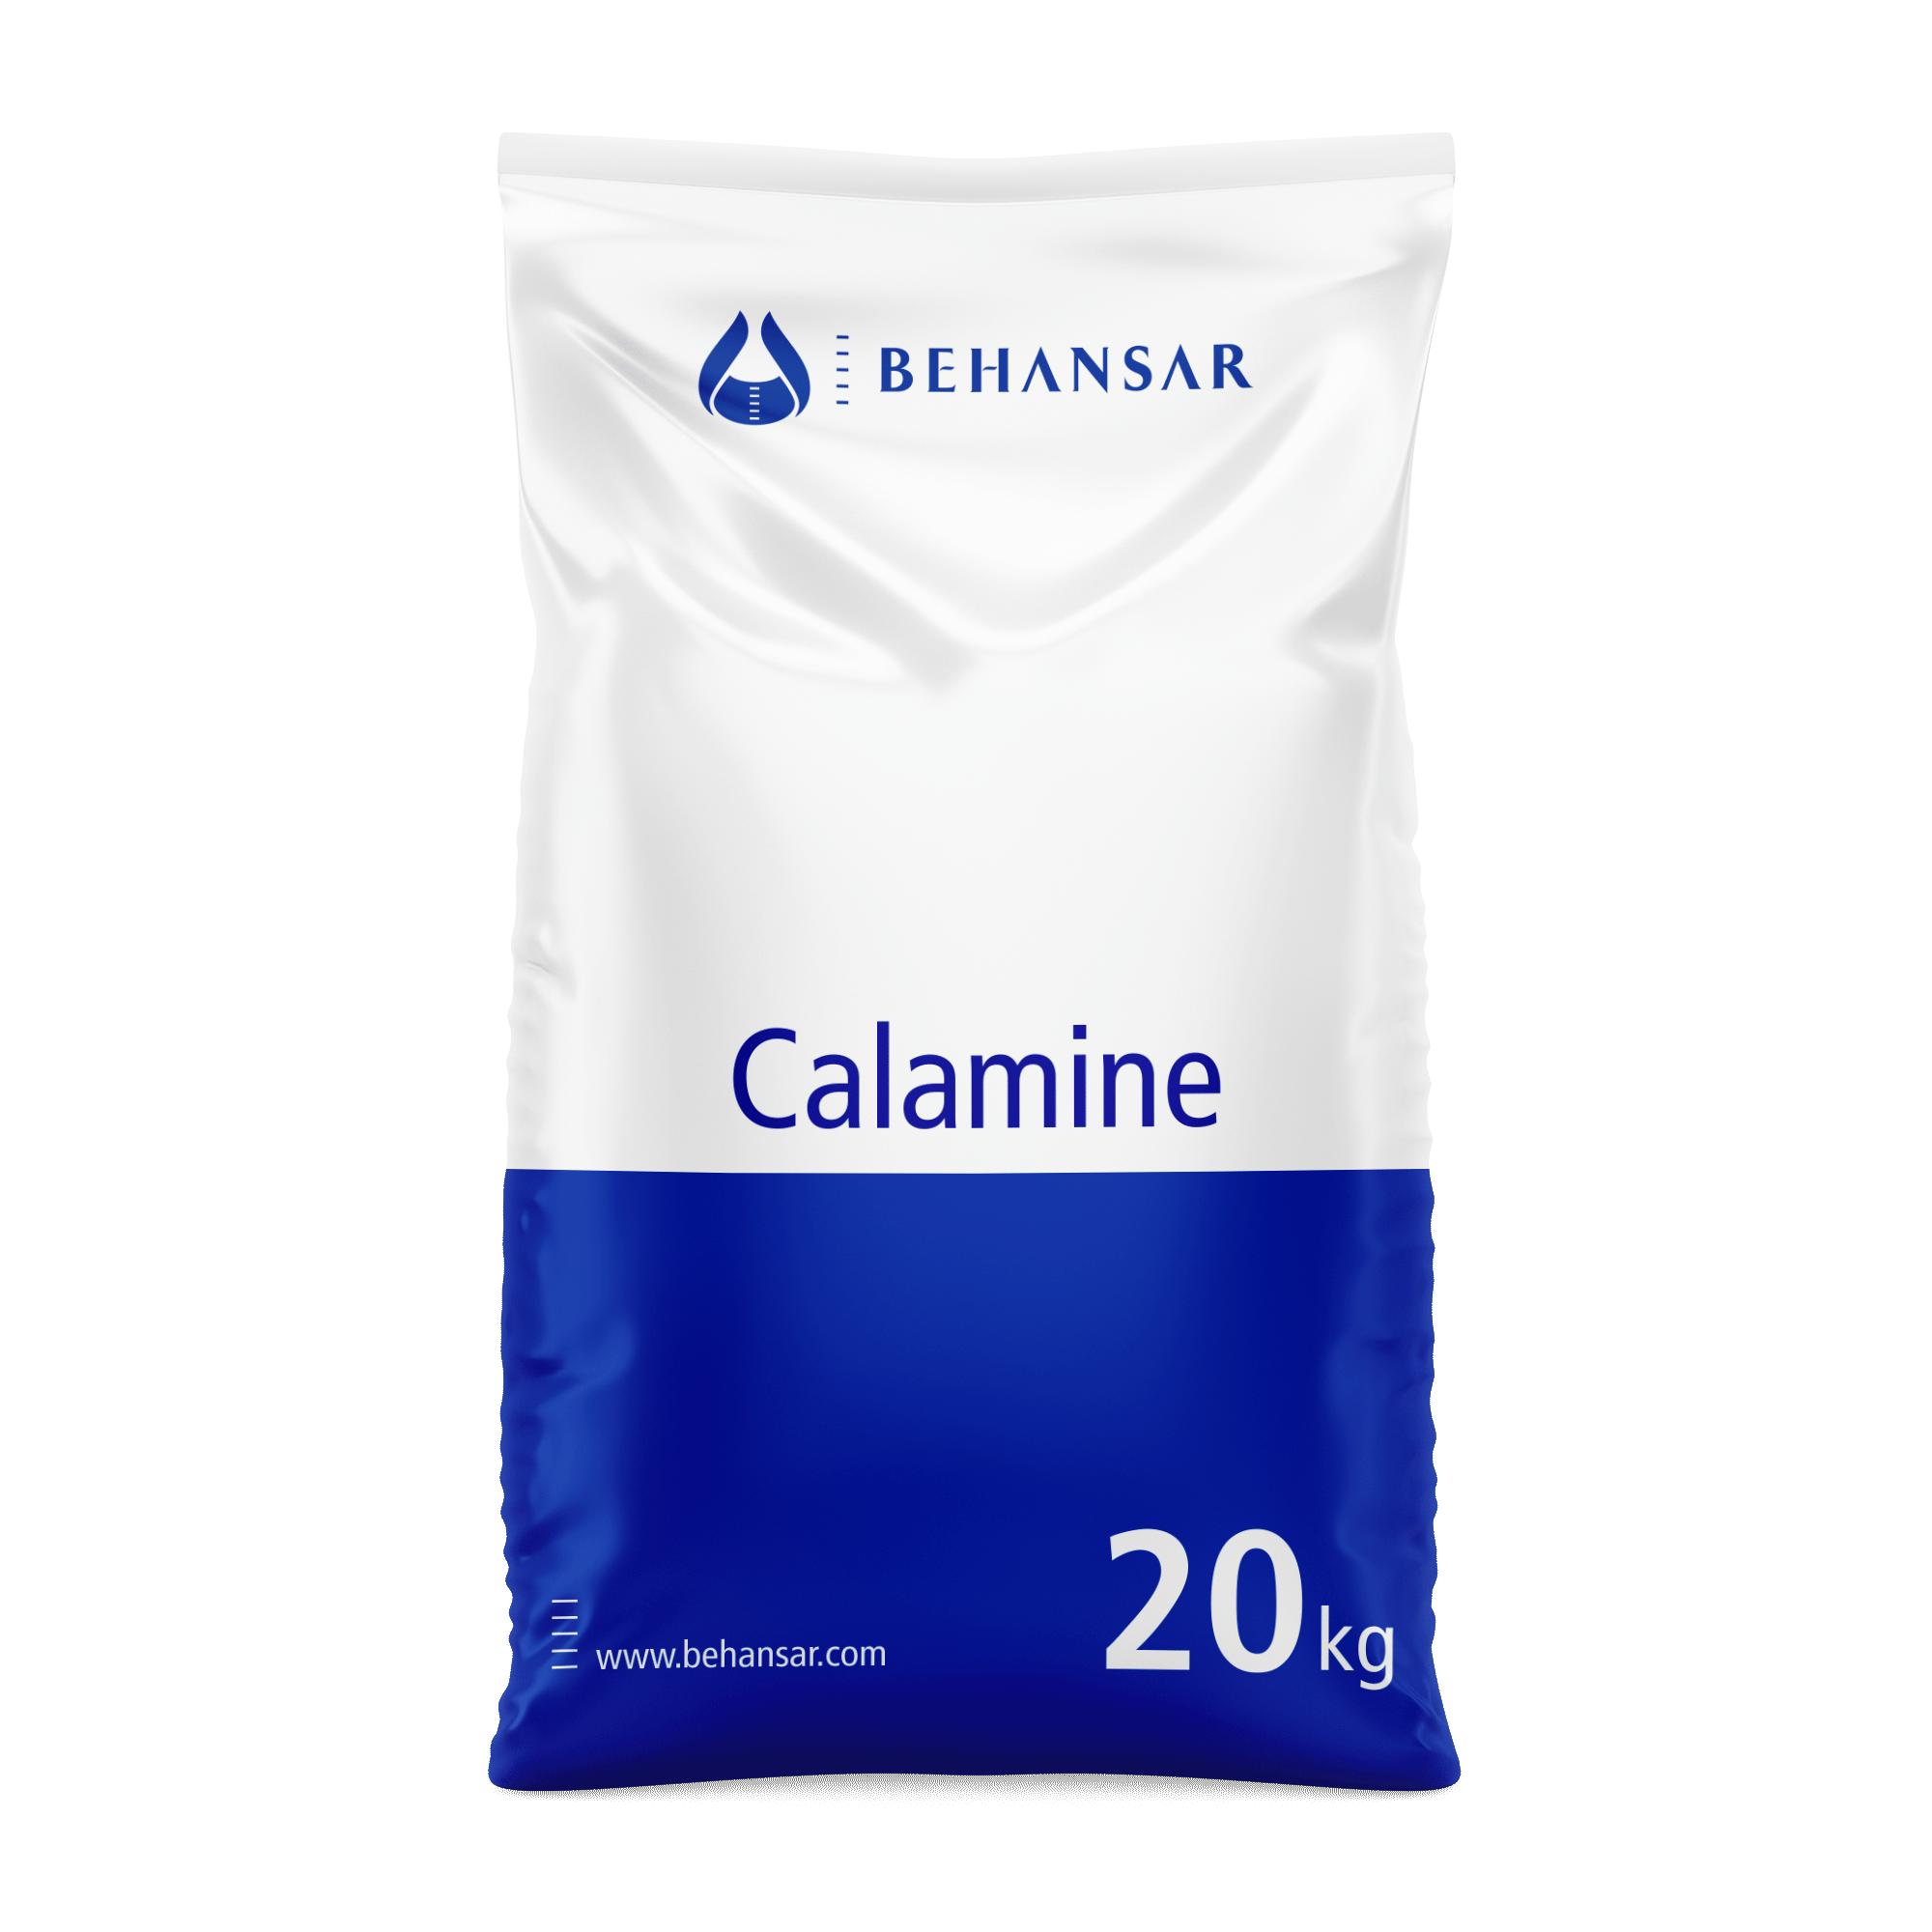 Calamine is one of the products of Behansar Co